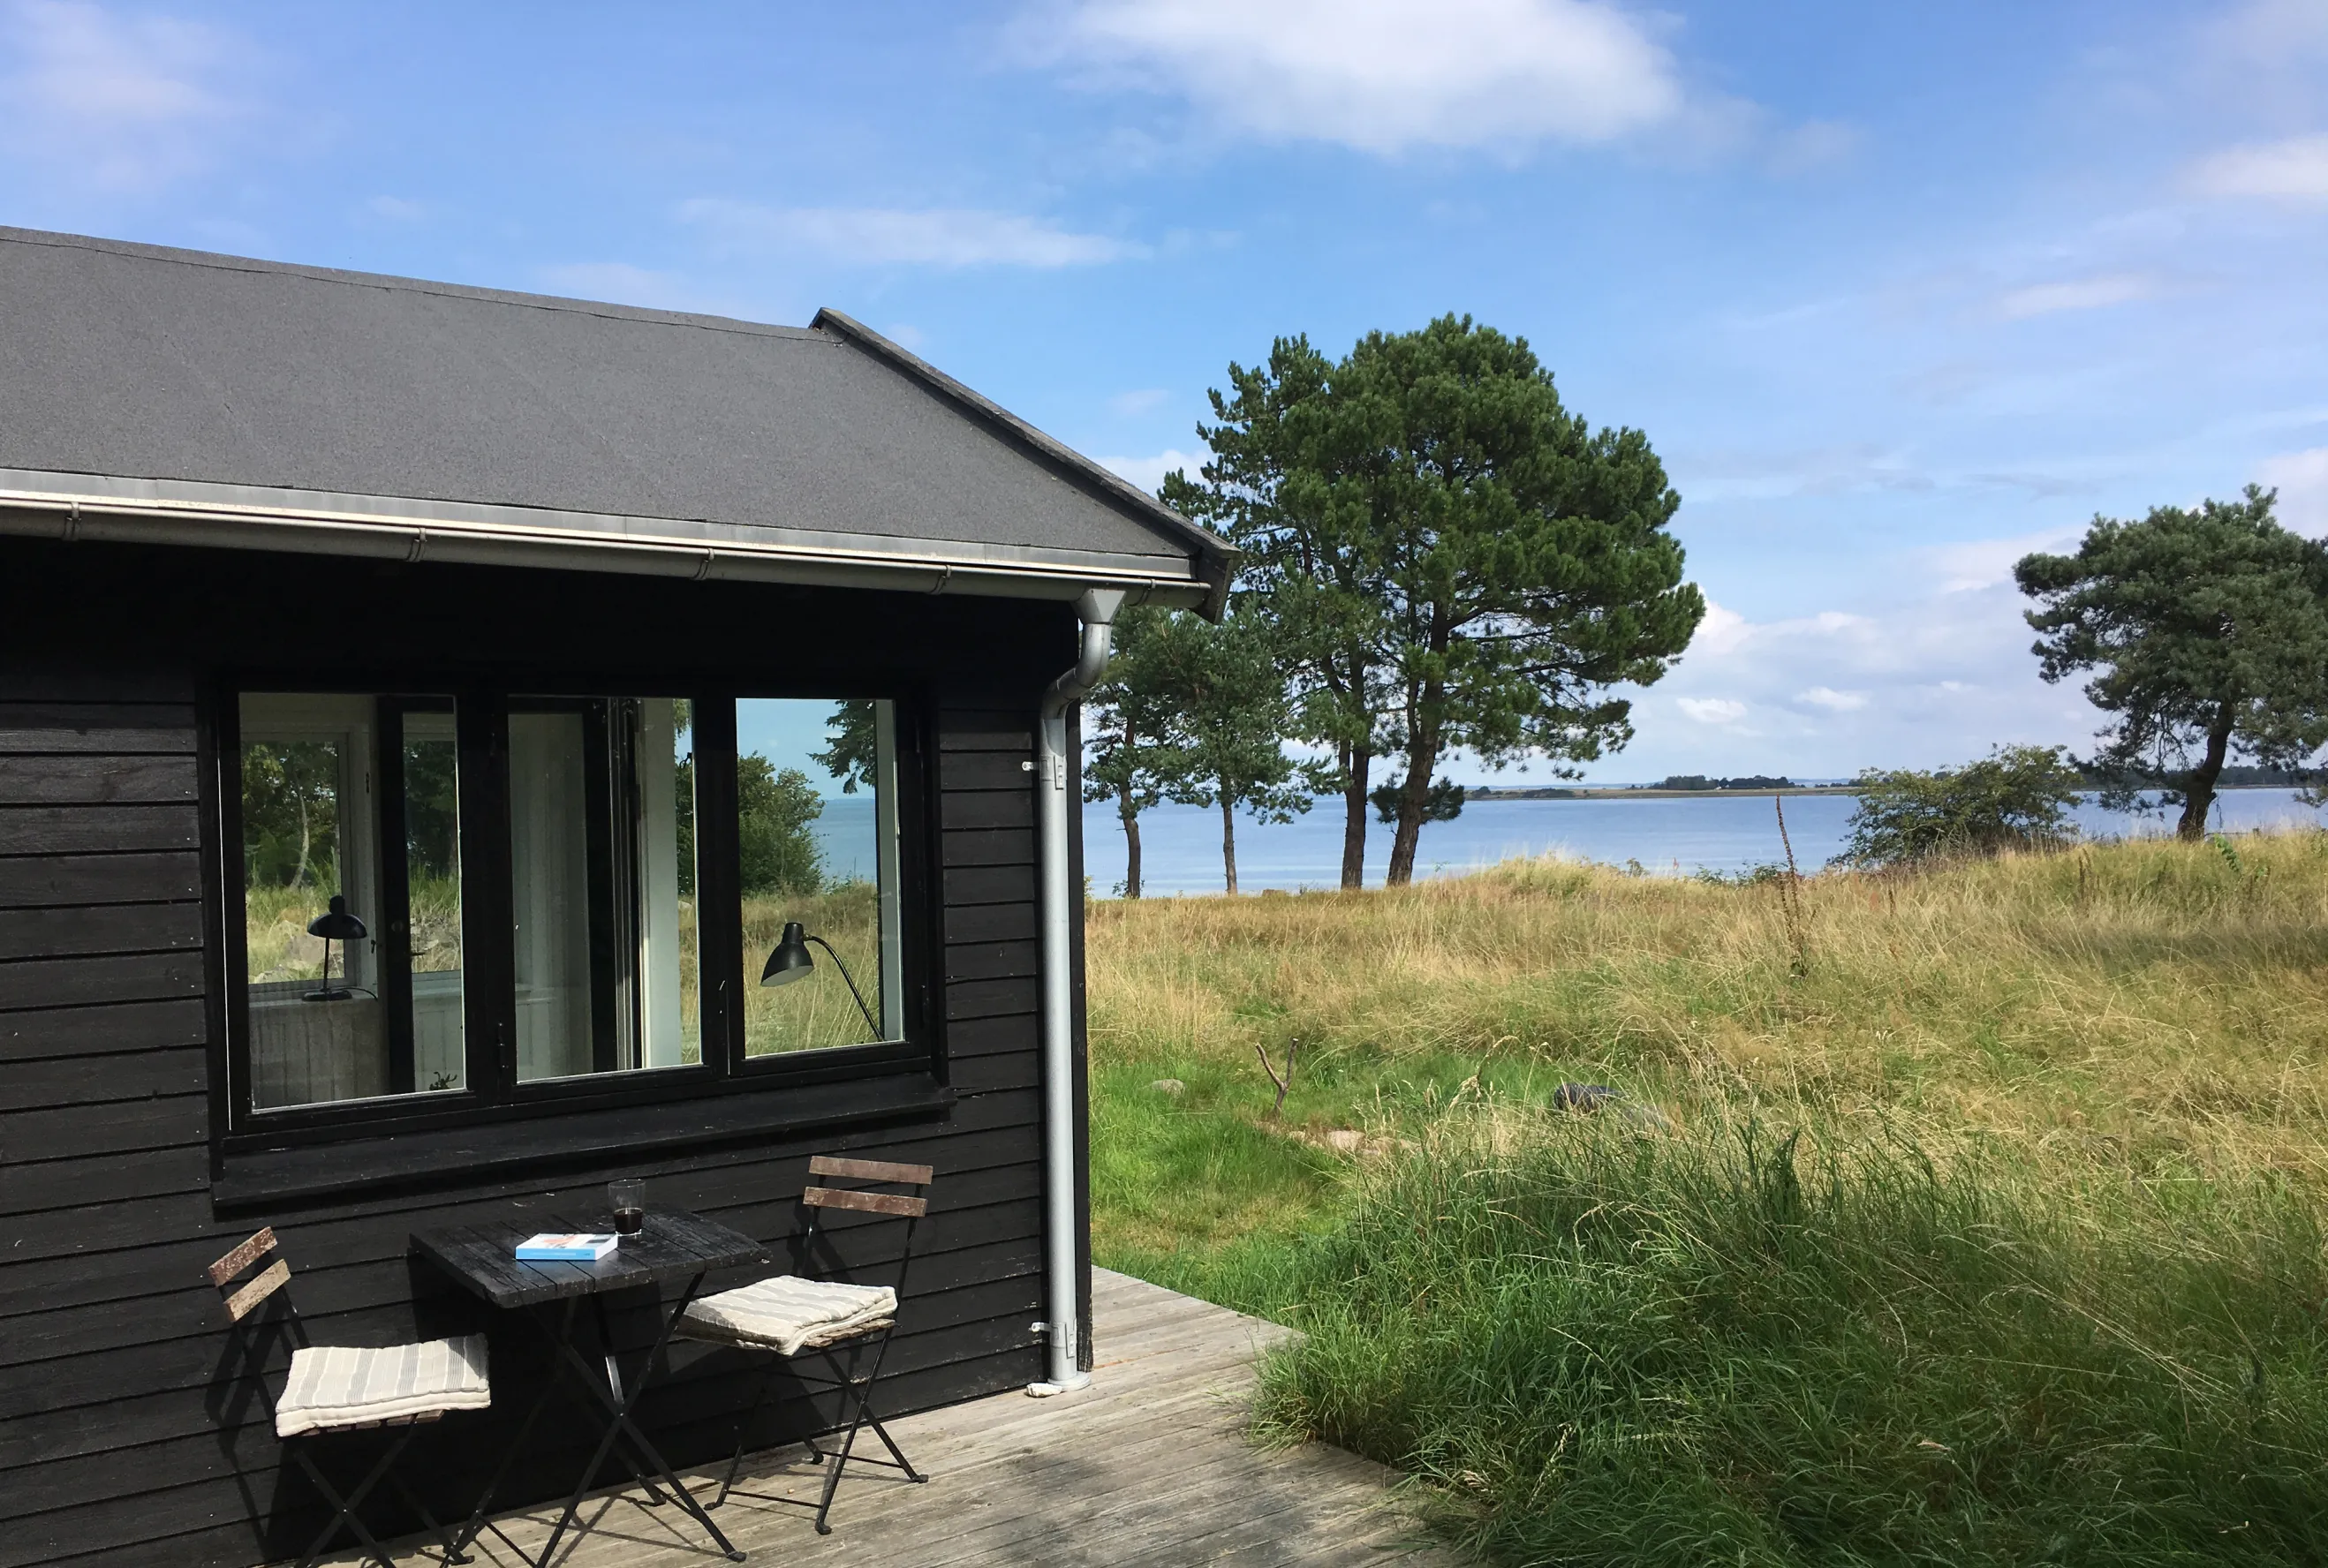 Exterior shot of a summerhouse in Denmark, showing garden furnture in the foreground and the seashore in the background.